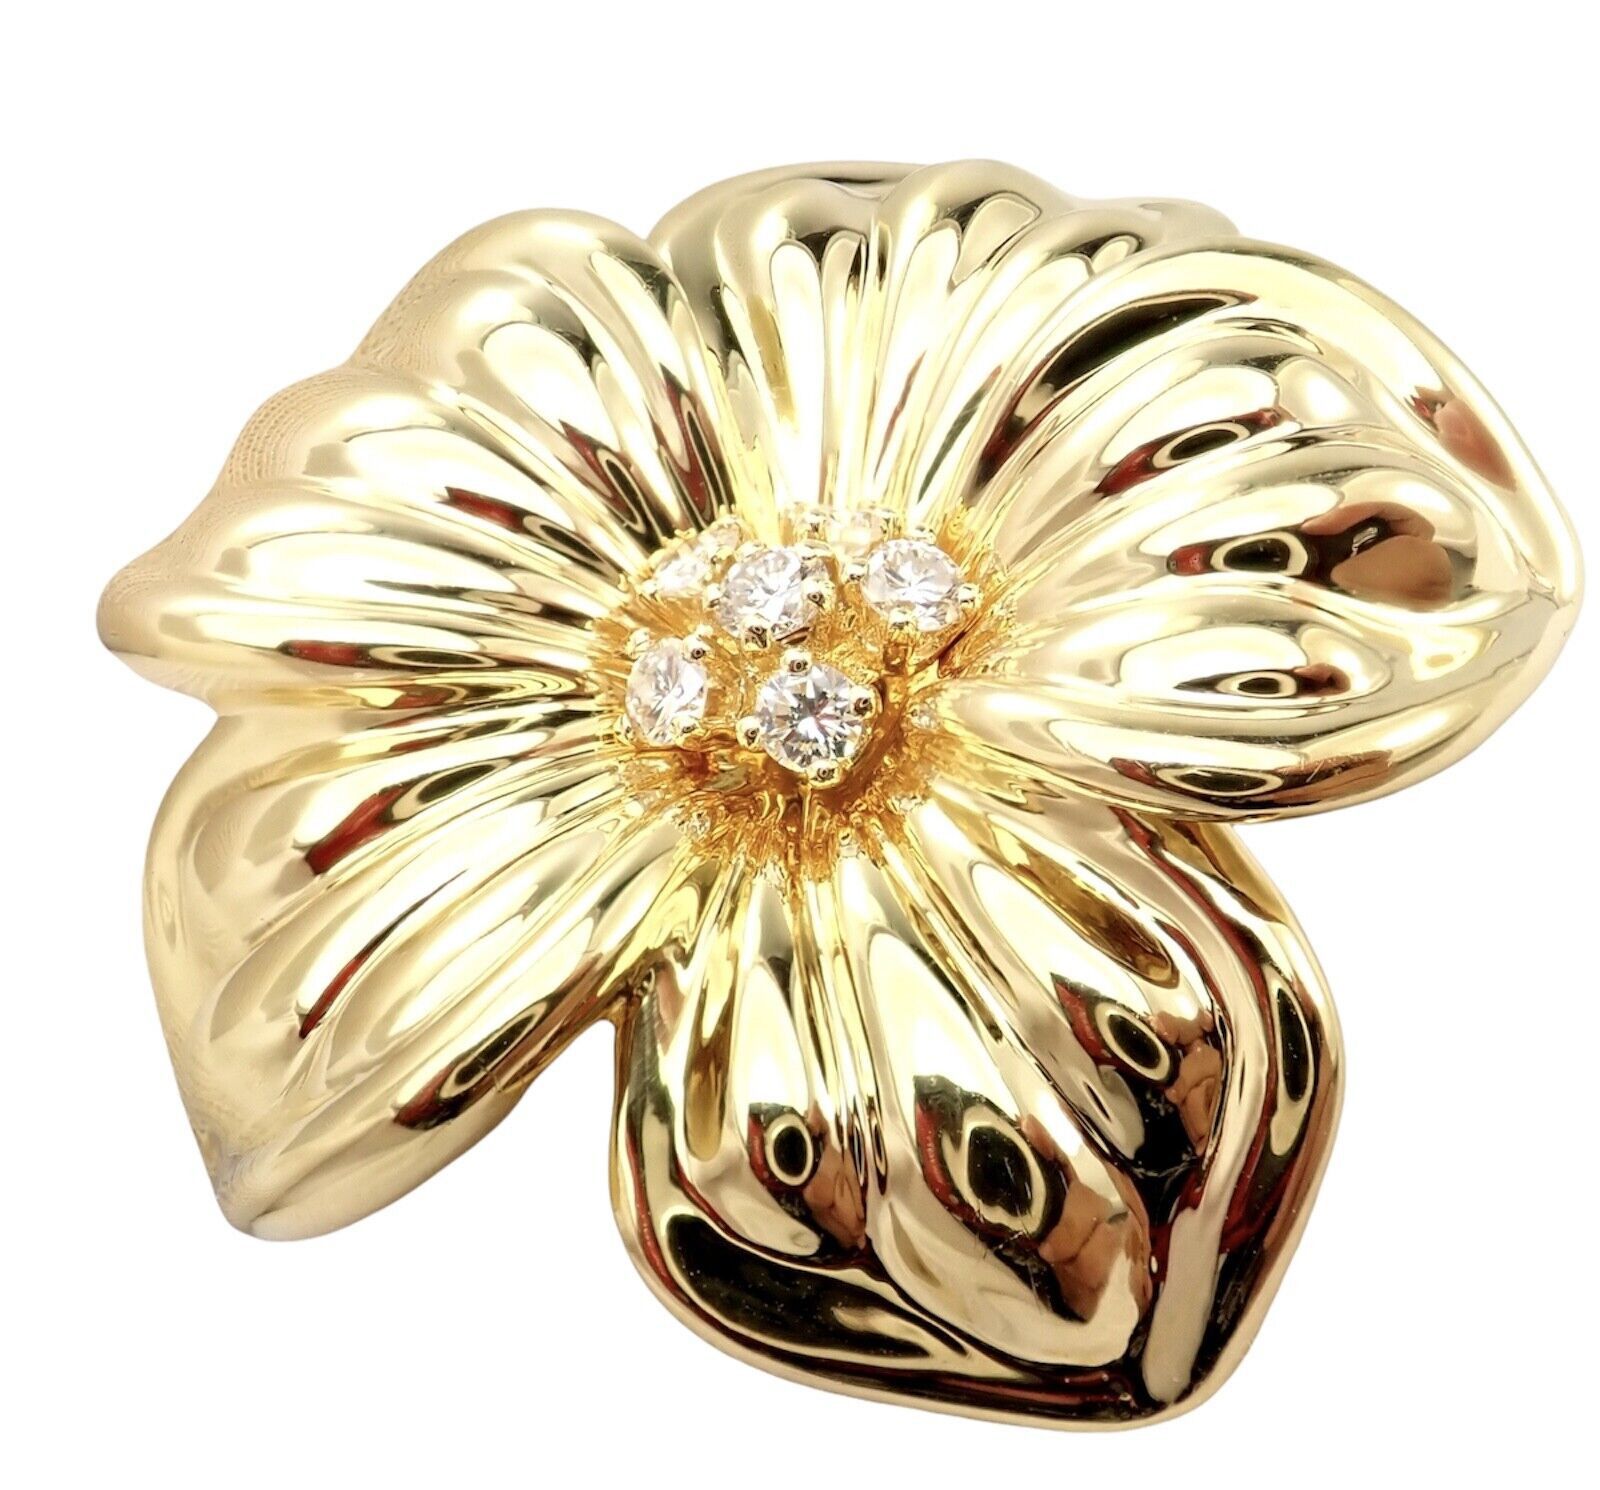 Van Cleef & Arpels Diamond 18k Yellow Gold Magnolia Flower Pin Brooch Size ONE SIZE - 9 Thumbnail